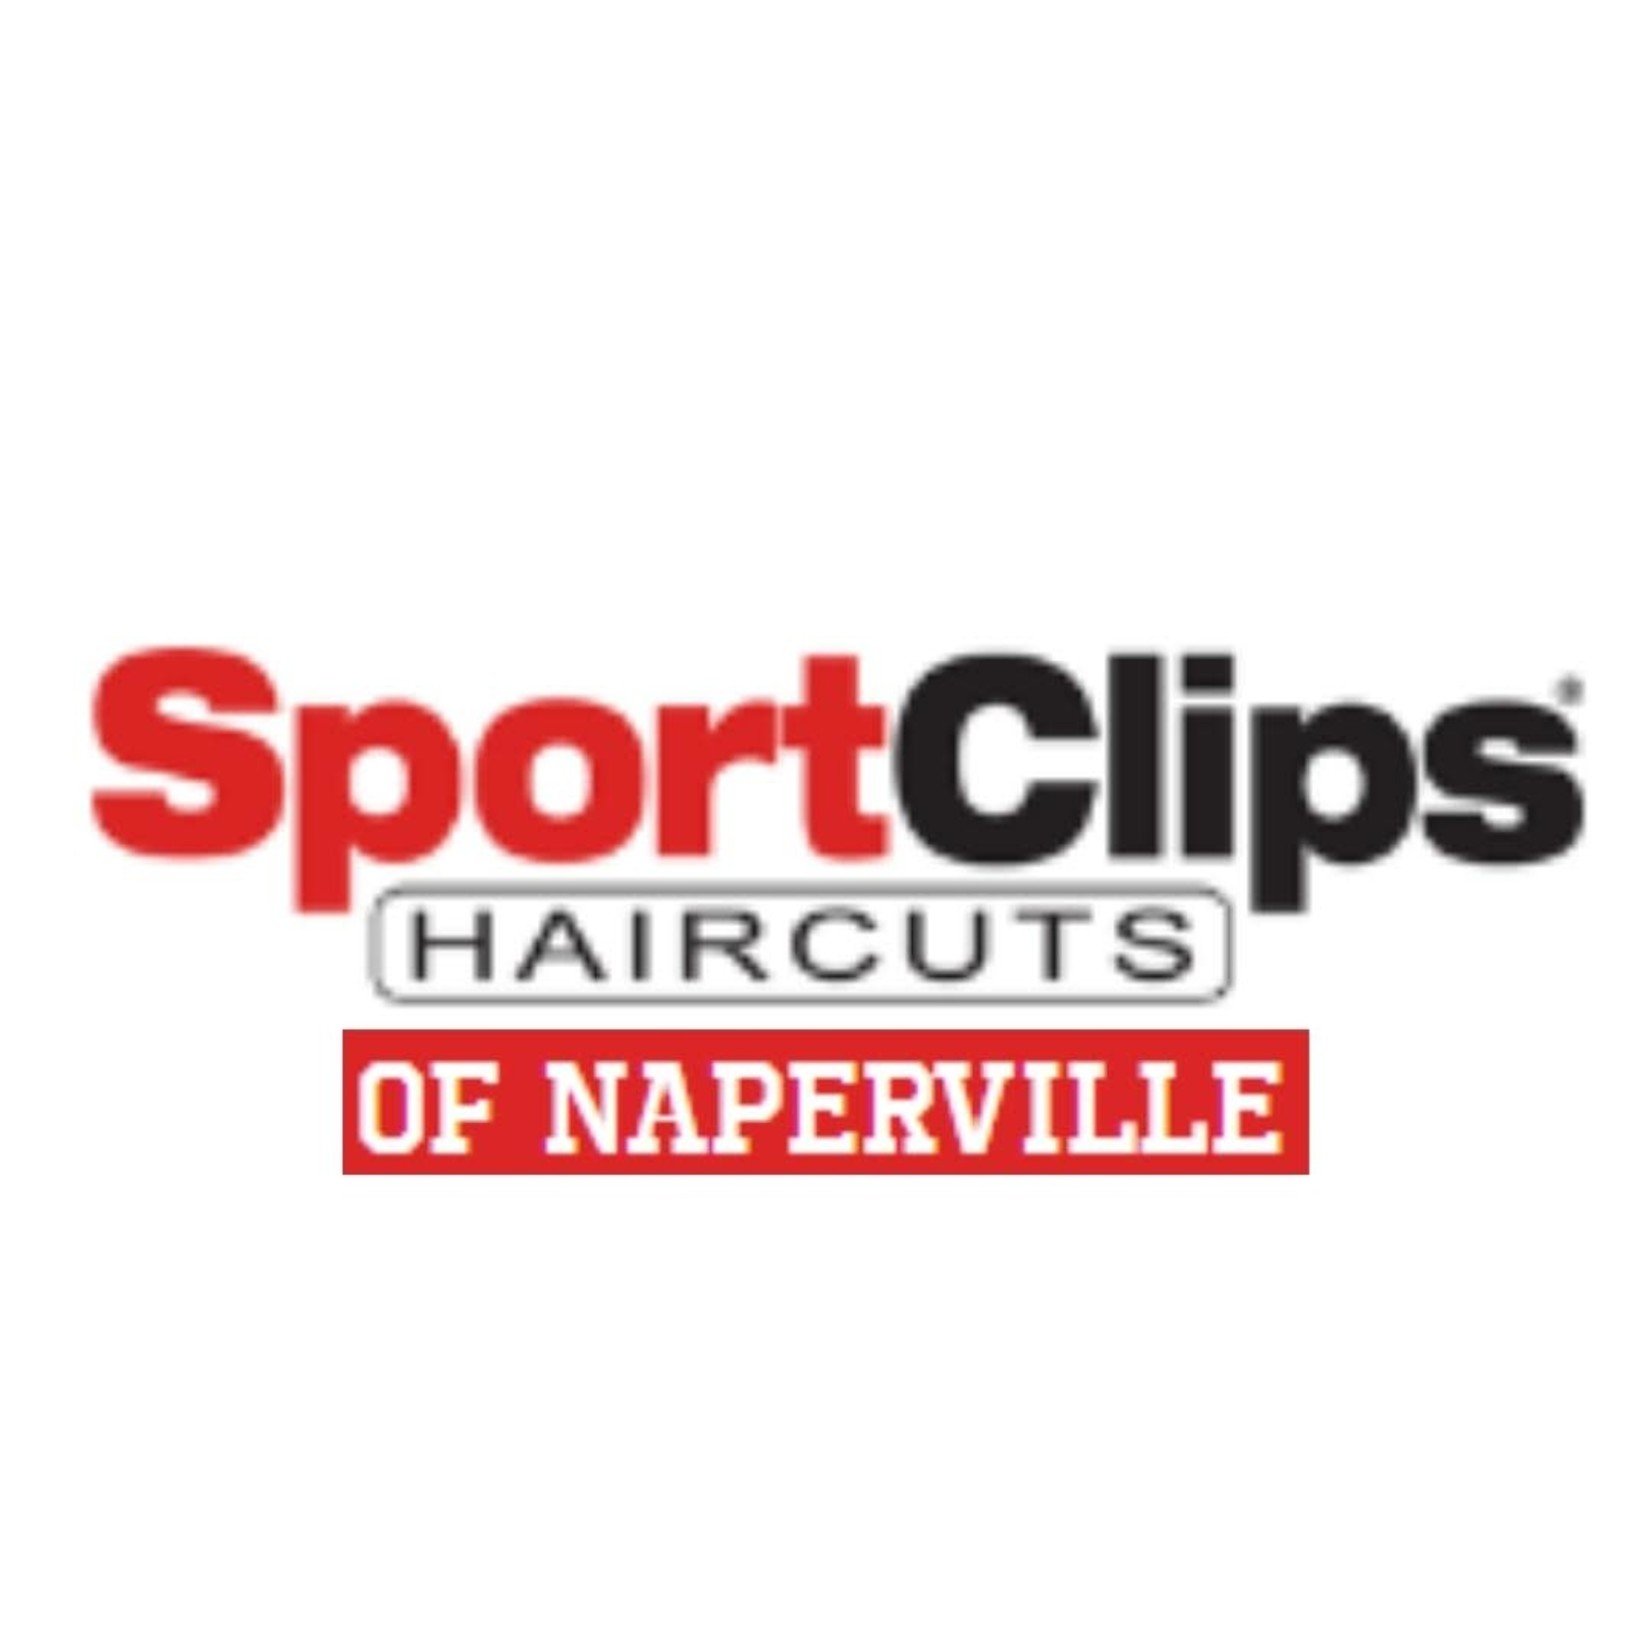 Sport Clips-Naperville Sport Clips-Naperville $29.00 MVP Haircut Package at Sports Clips-Naperville